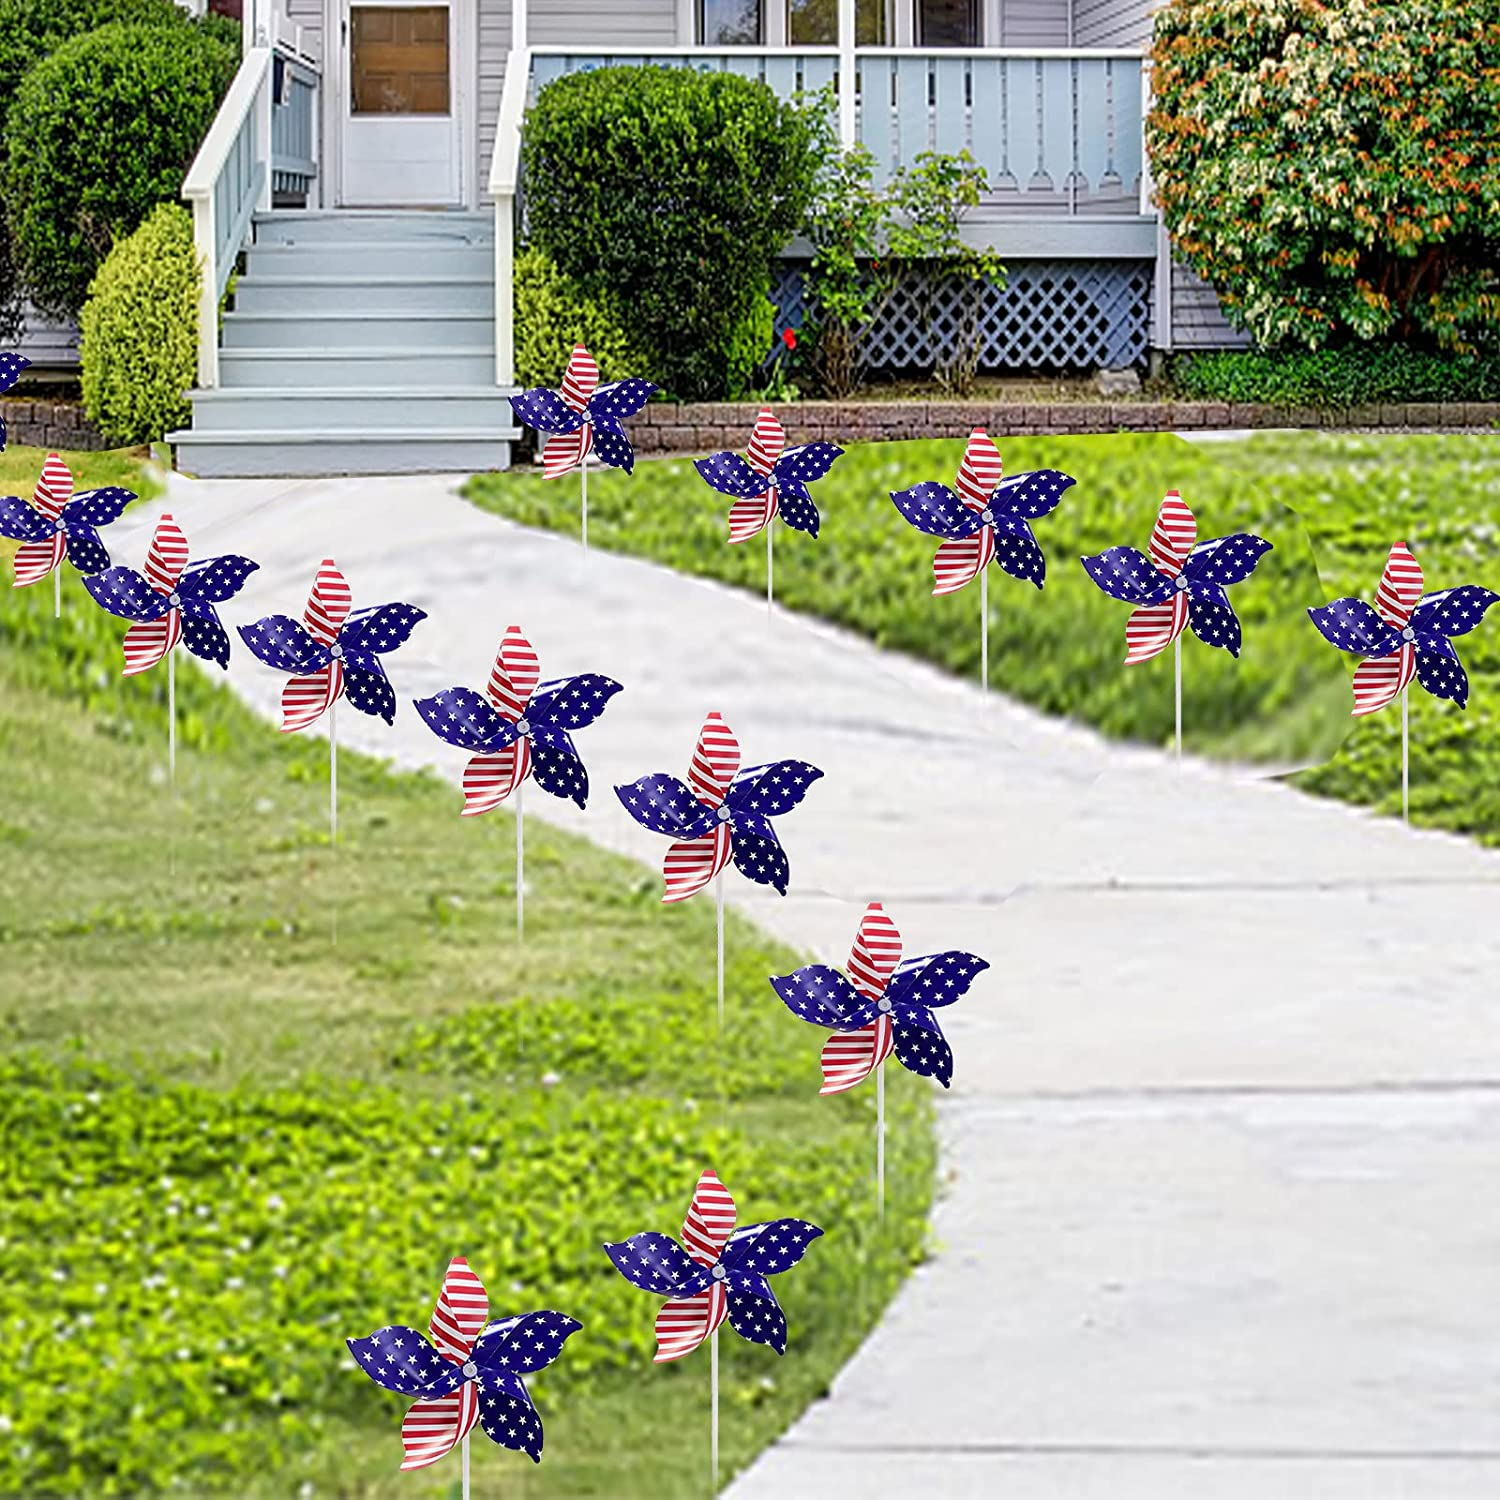 4Th of July Decorations, 12 Pcs Patriotic Pinwheels Red White and Blue Decorations for Independence Day Fourth of July Indoor Outdoor Home Yard